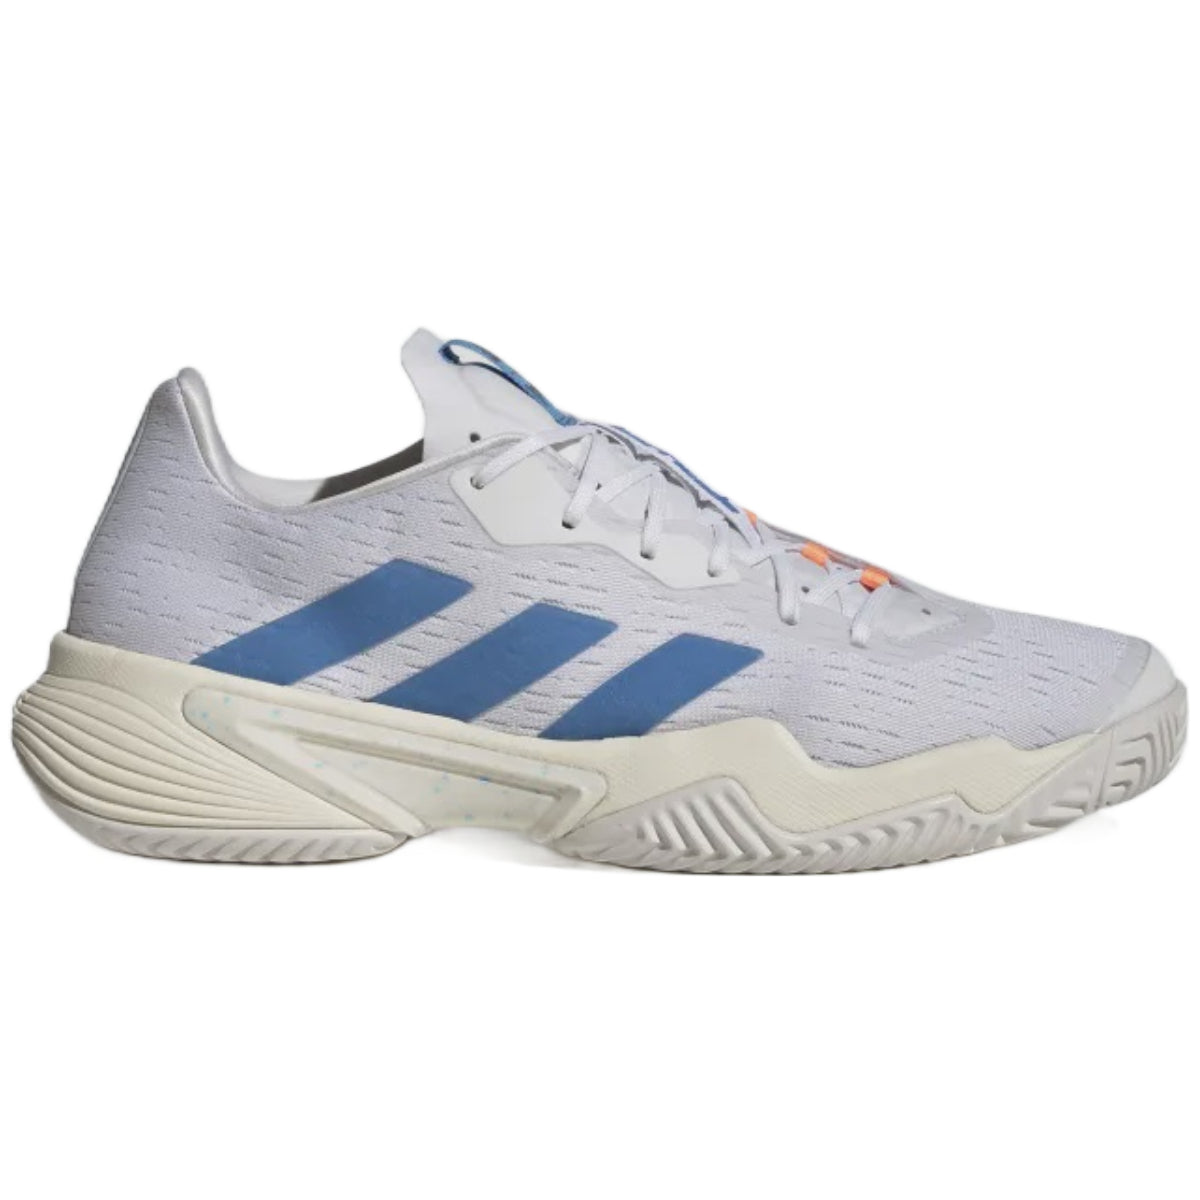 Calma patio detective Adidas Barricade M Parley-GY1369 – All About Tennis